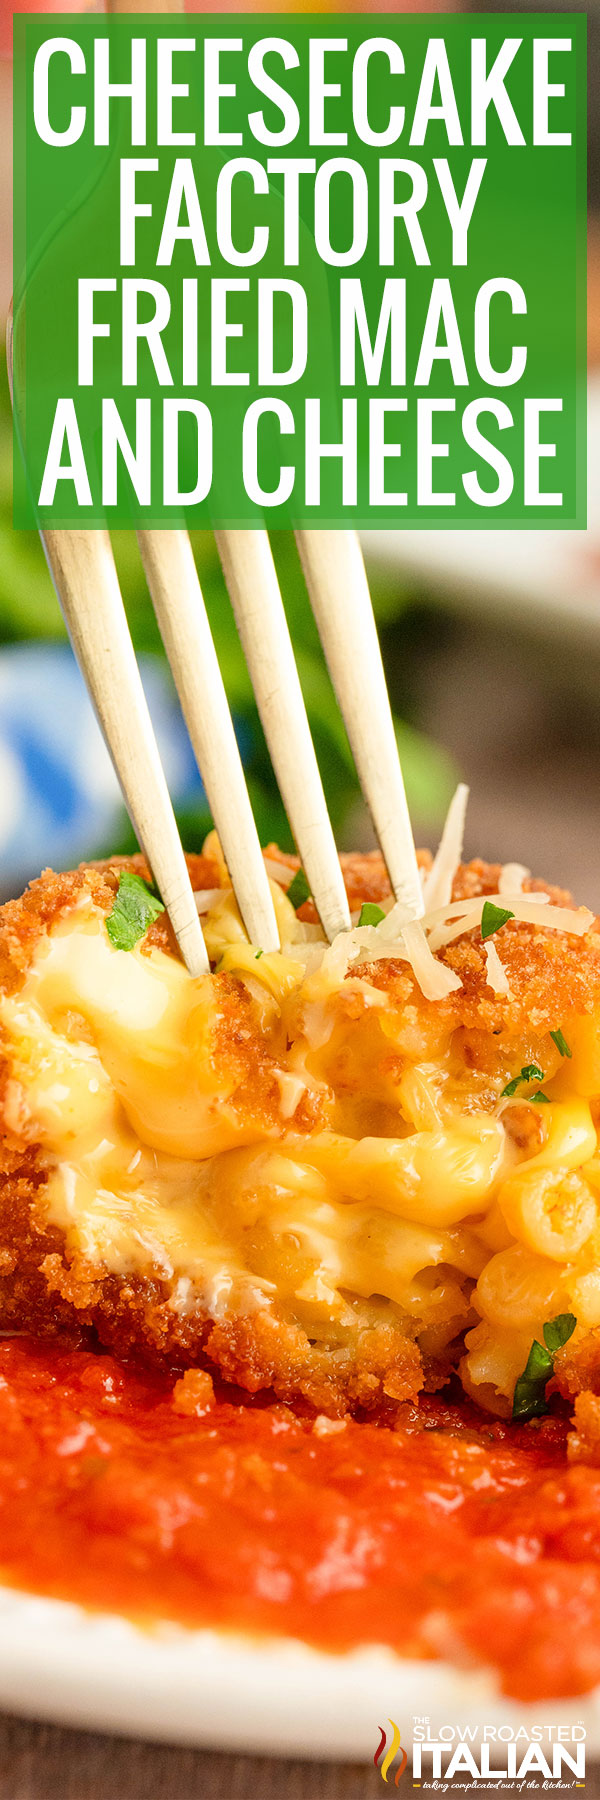 Cheesecake Factory Fried Mac and Cheese - PIN